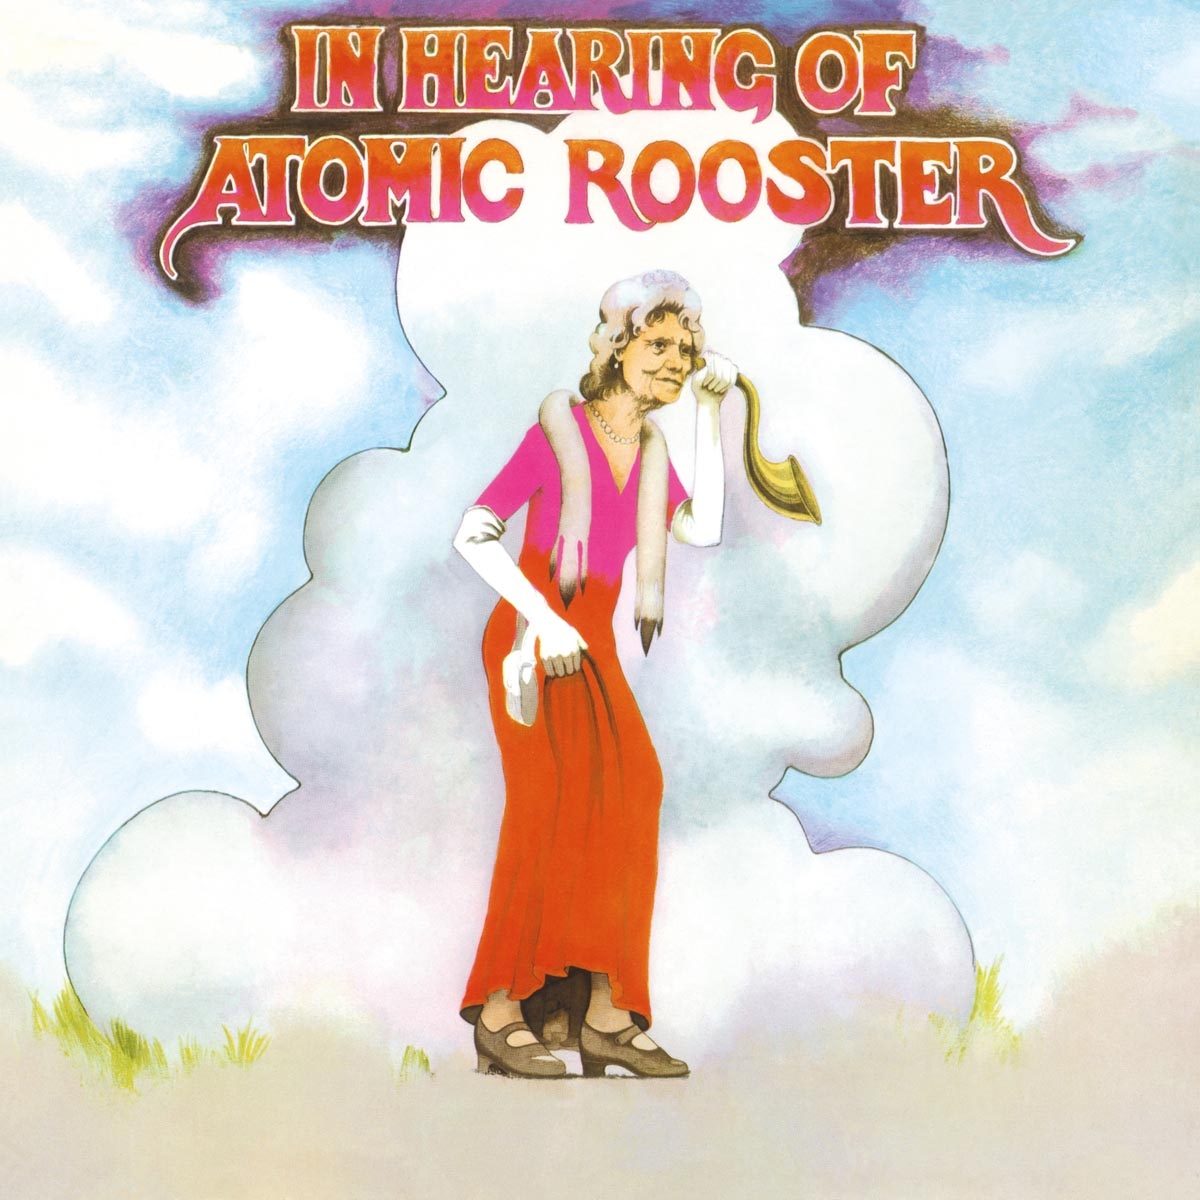 ATOMIC ROOSTER - Atomic Roooster (remastered edition)